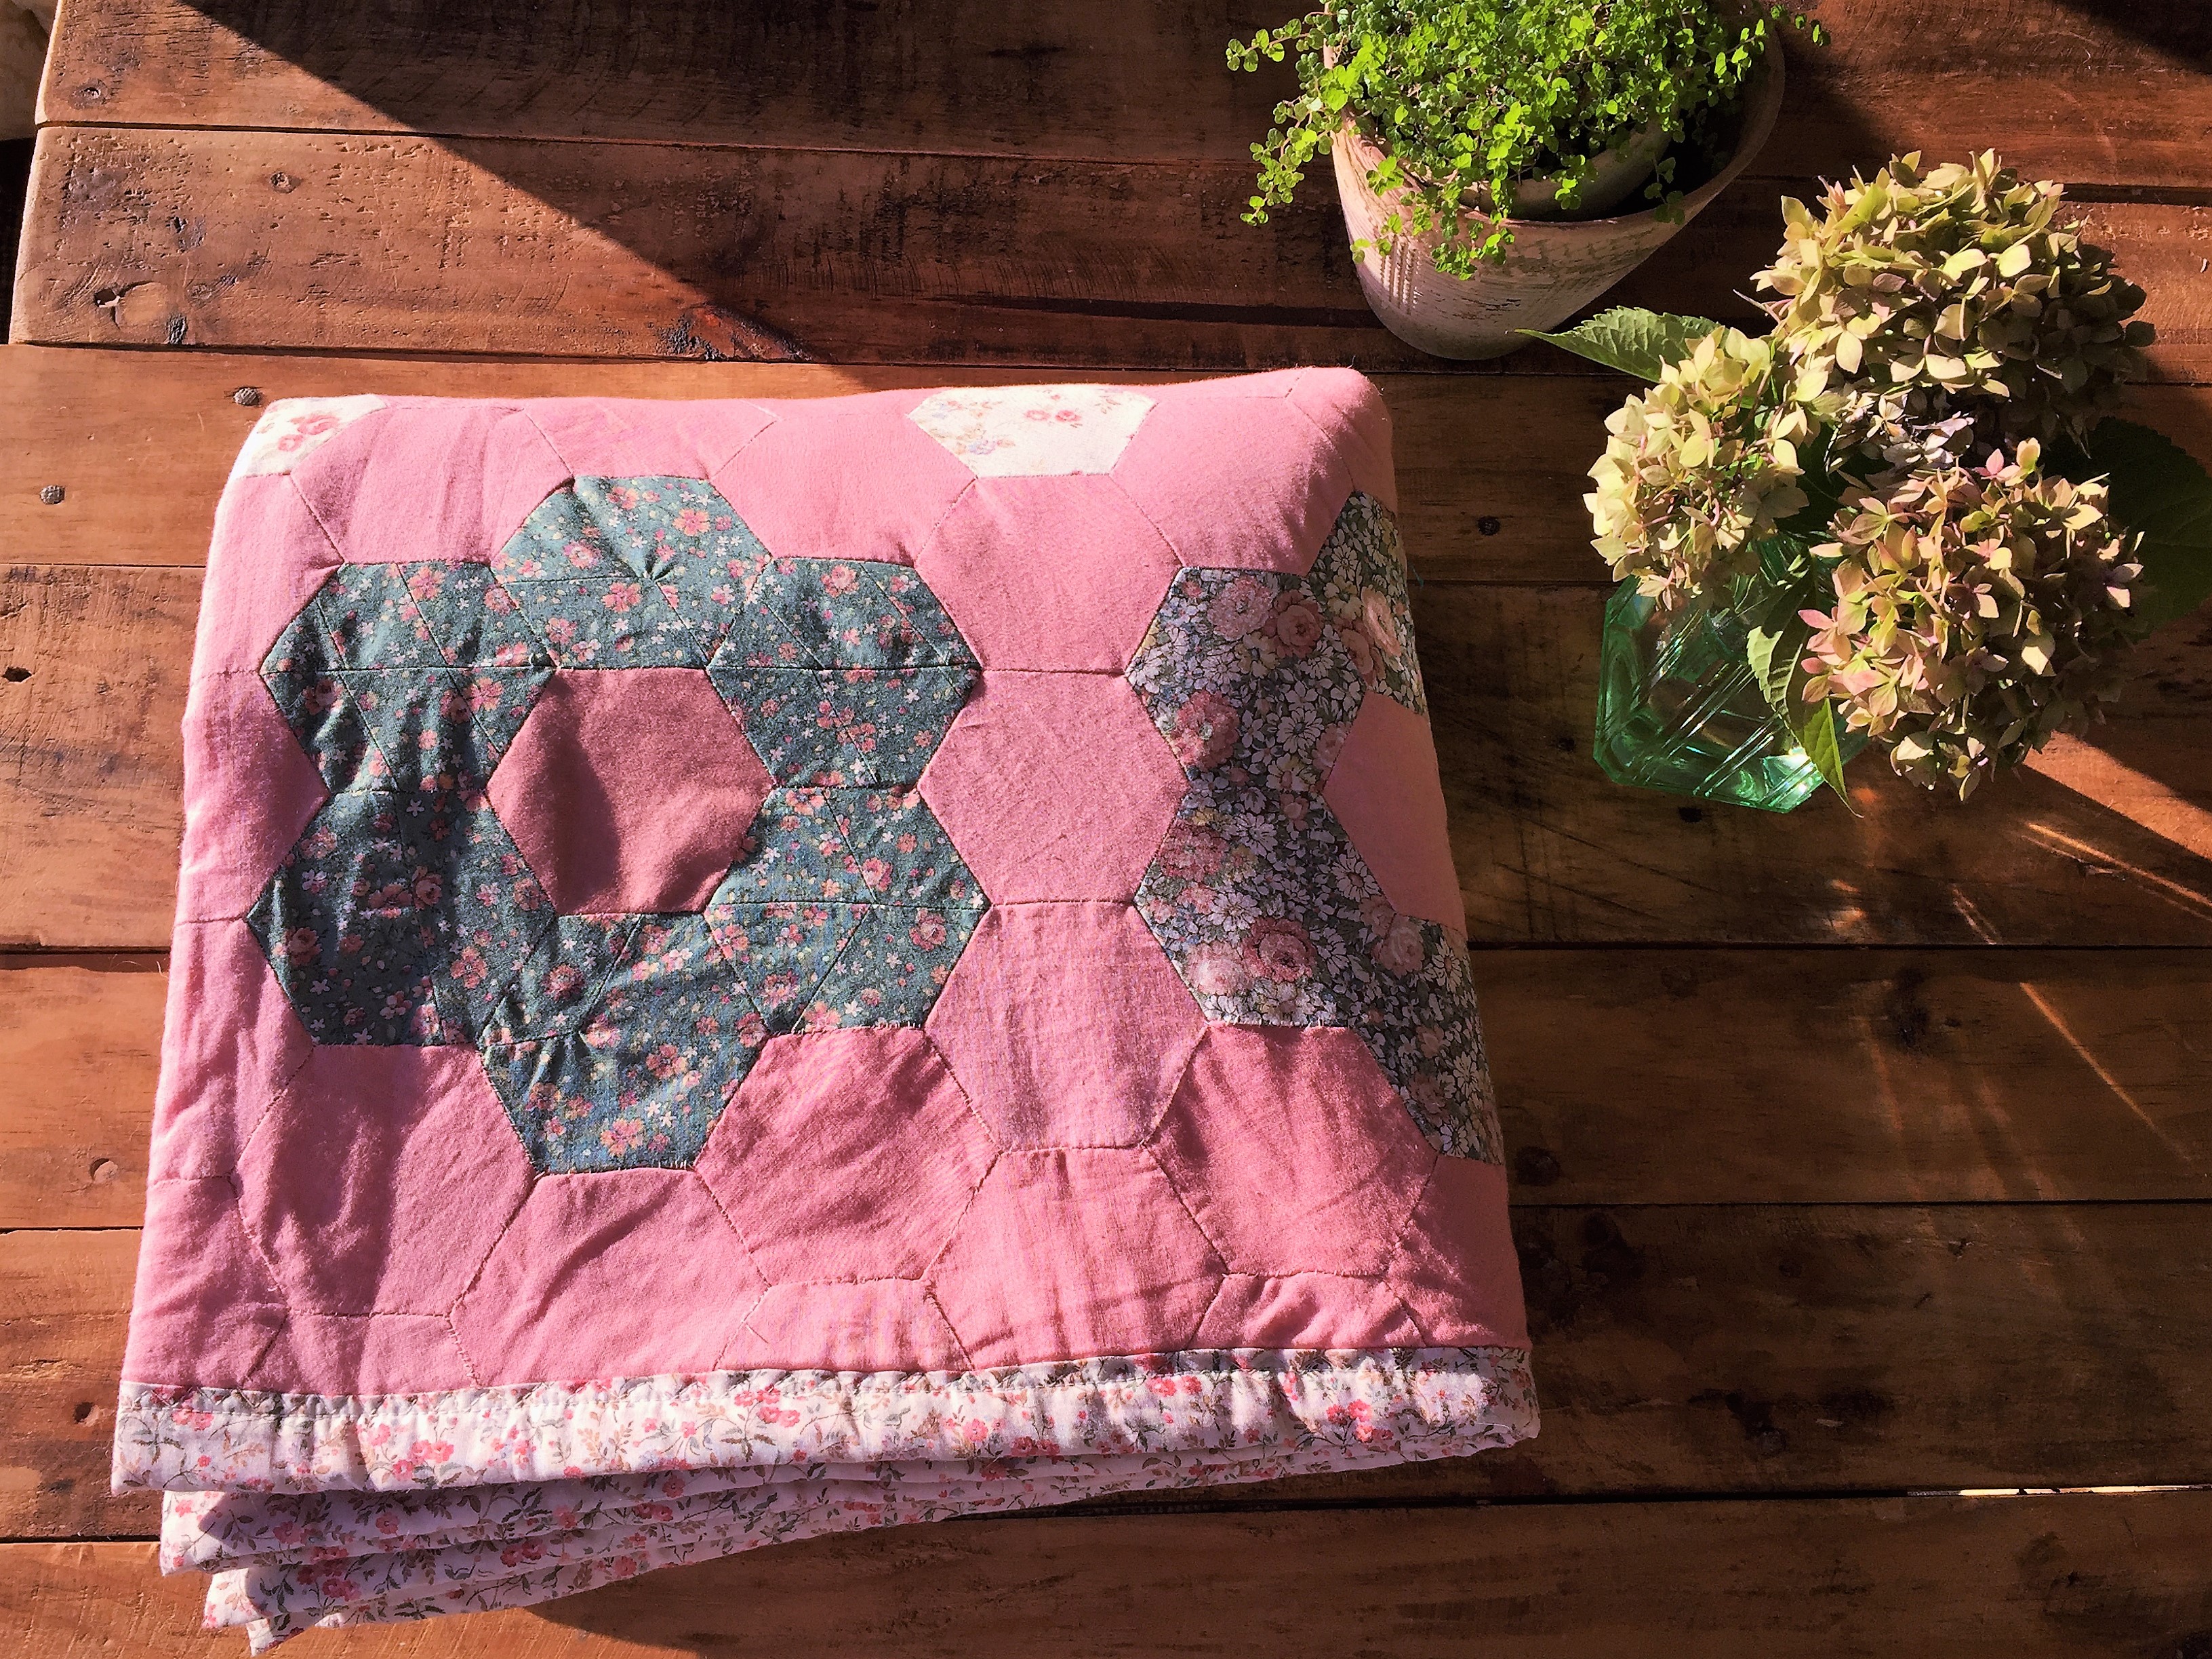 My first quilt made with love….